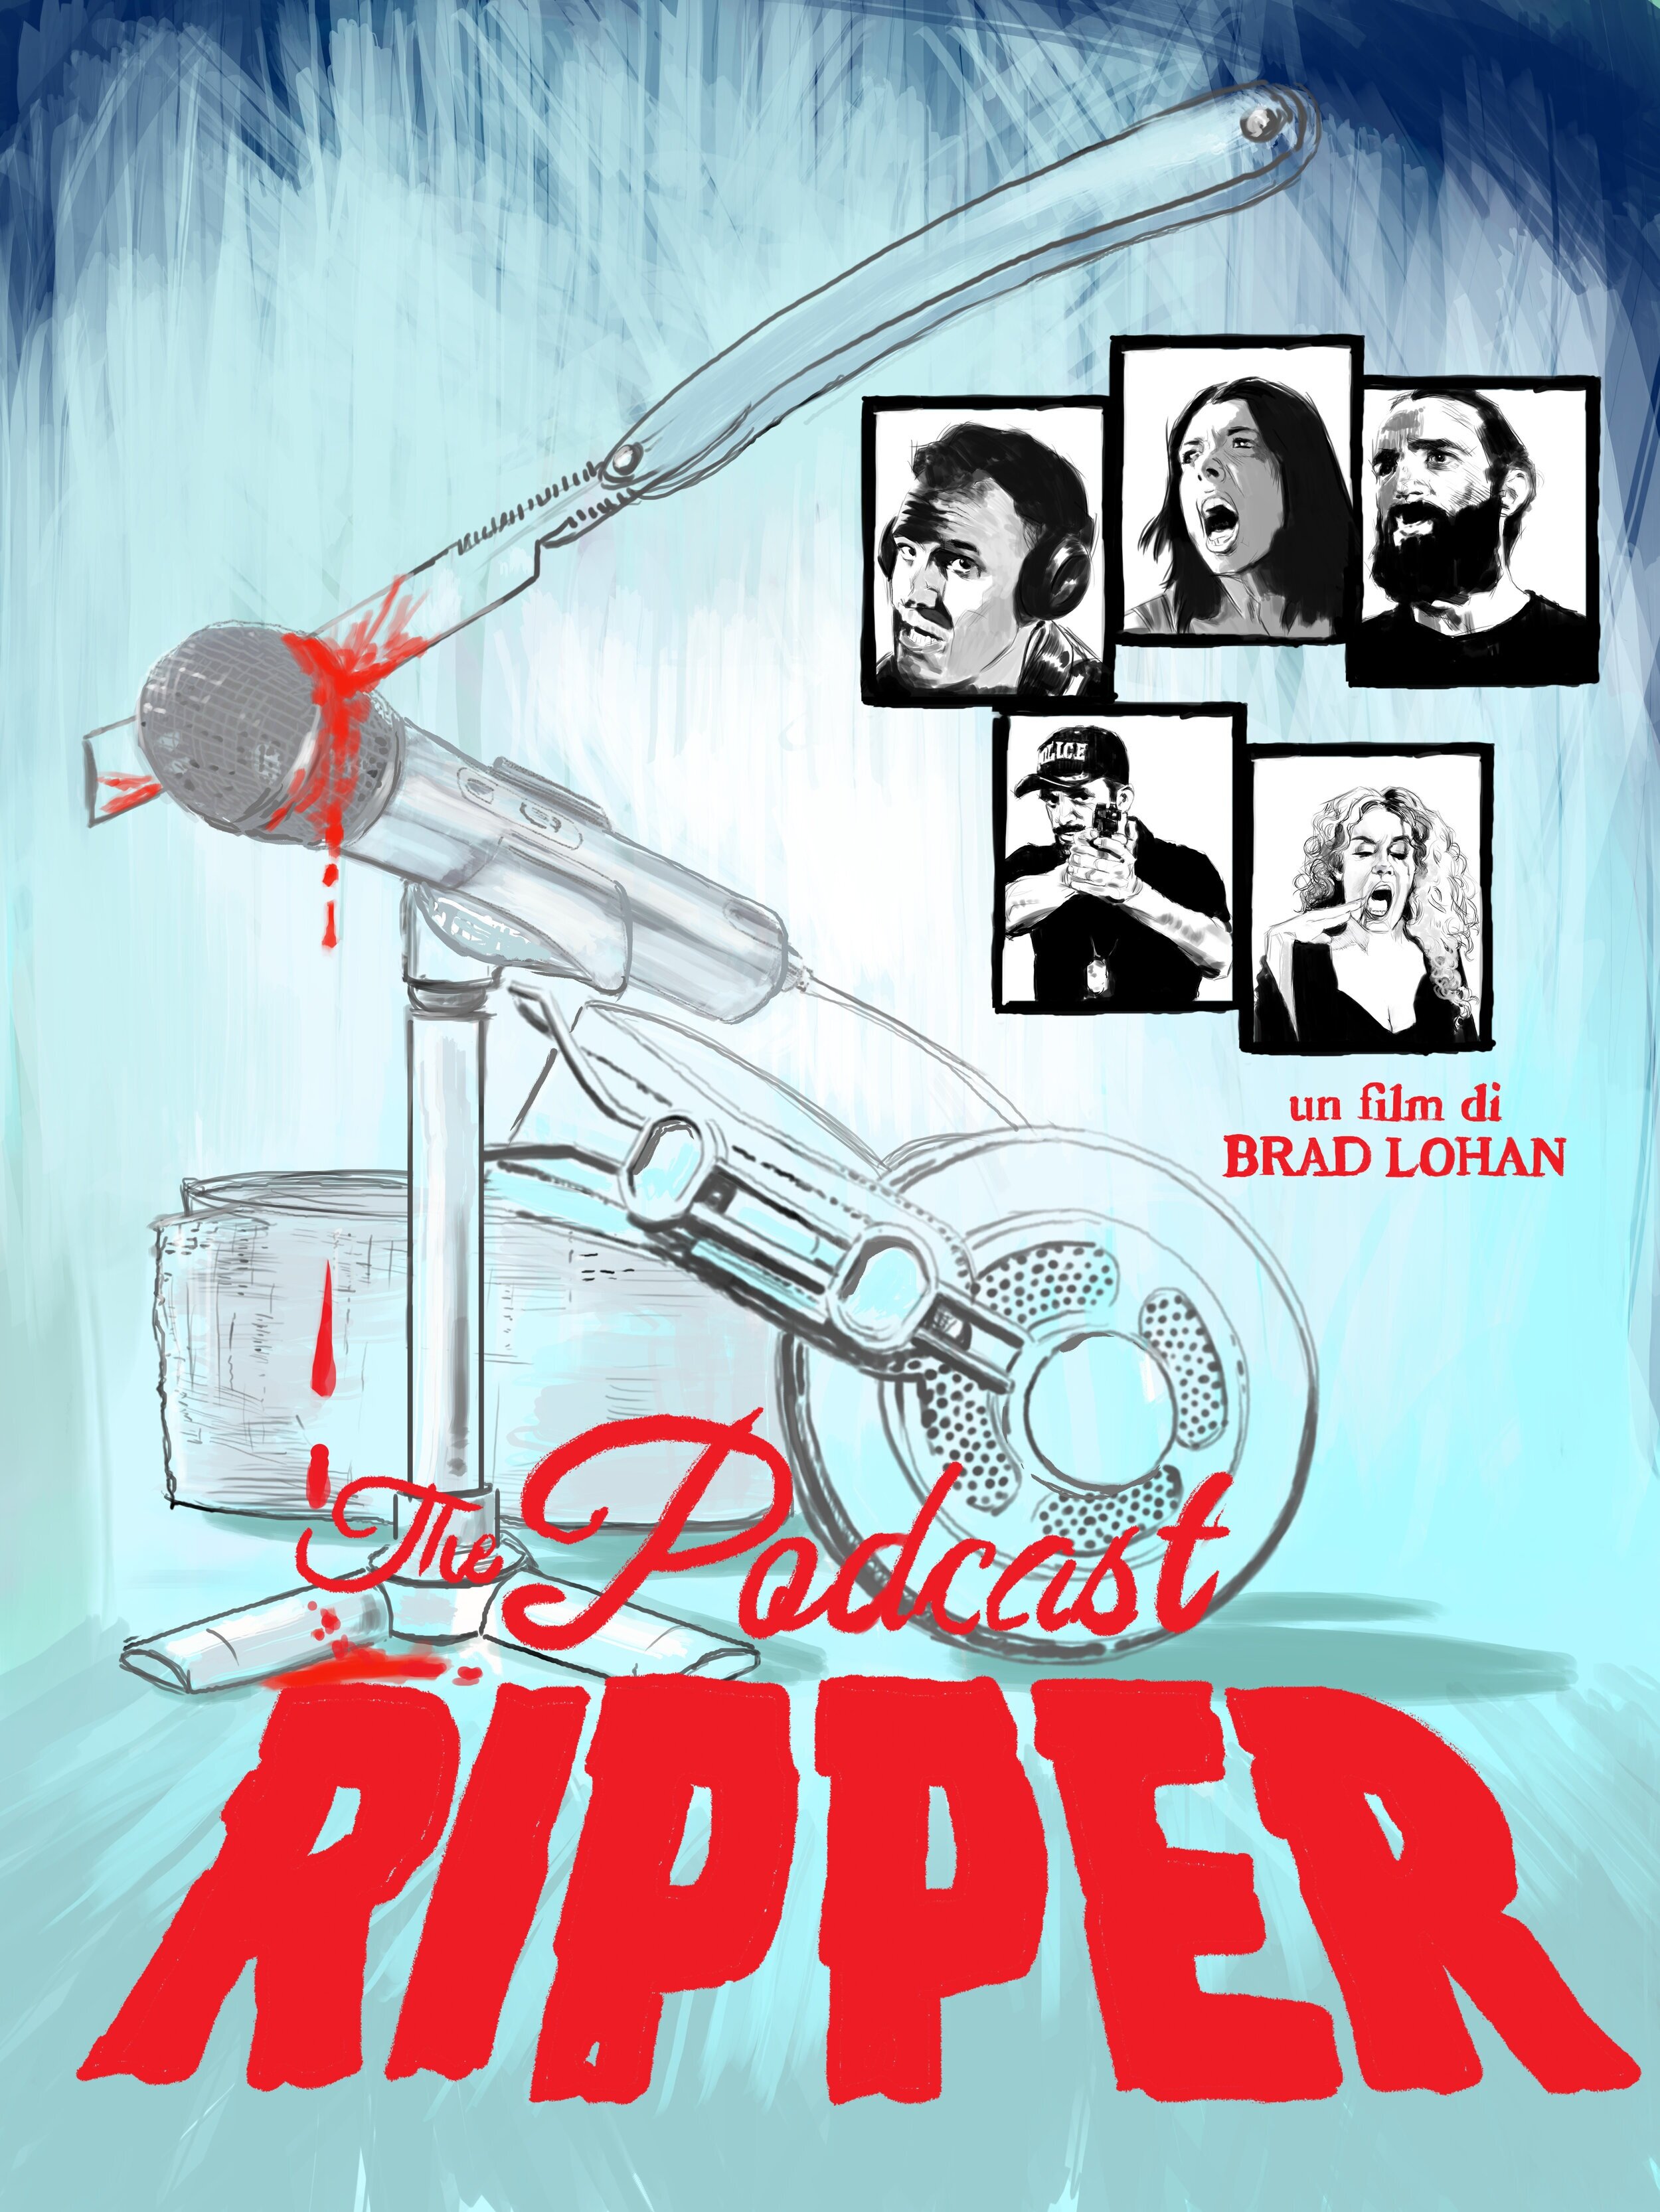 THE PODCAST RIPPER by Brad Lohan